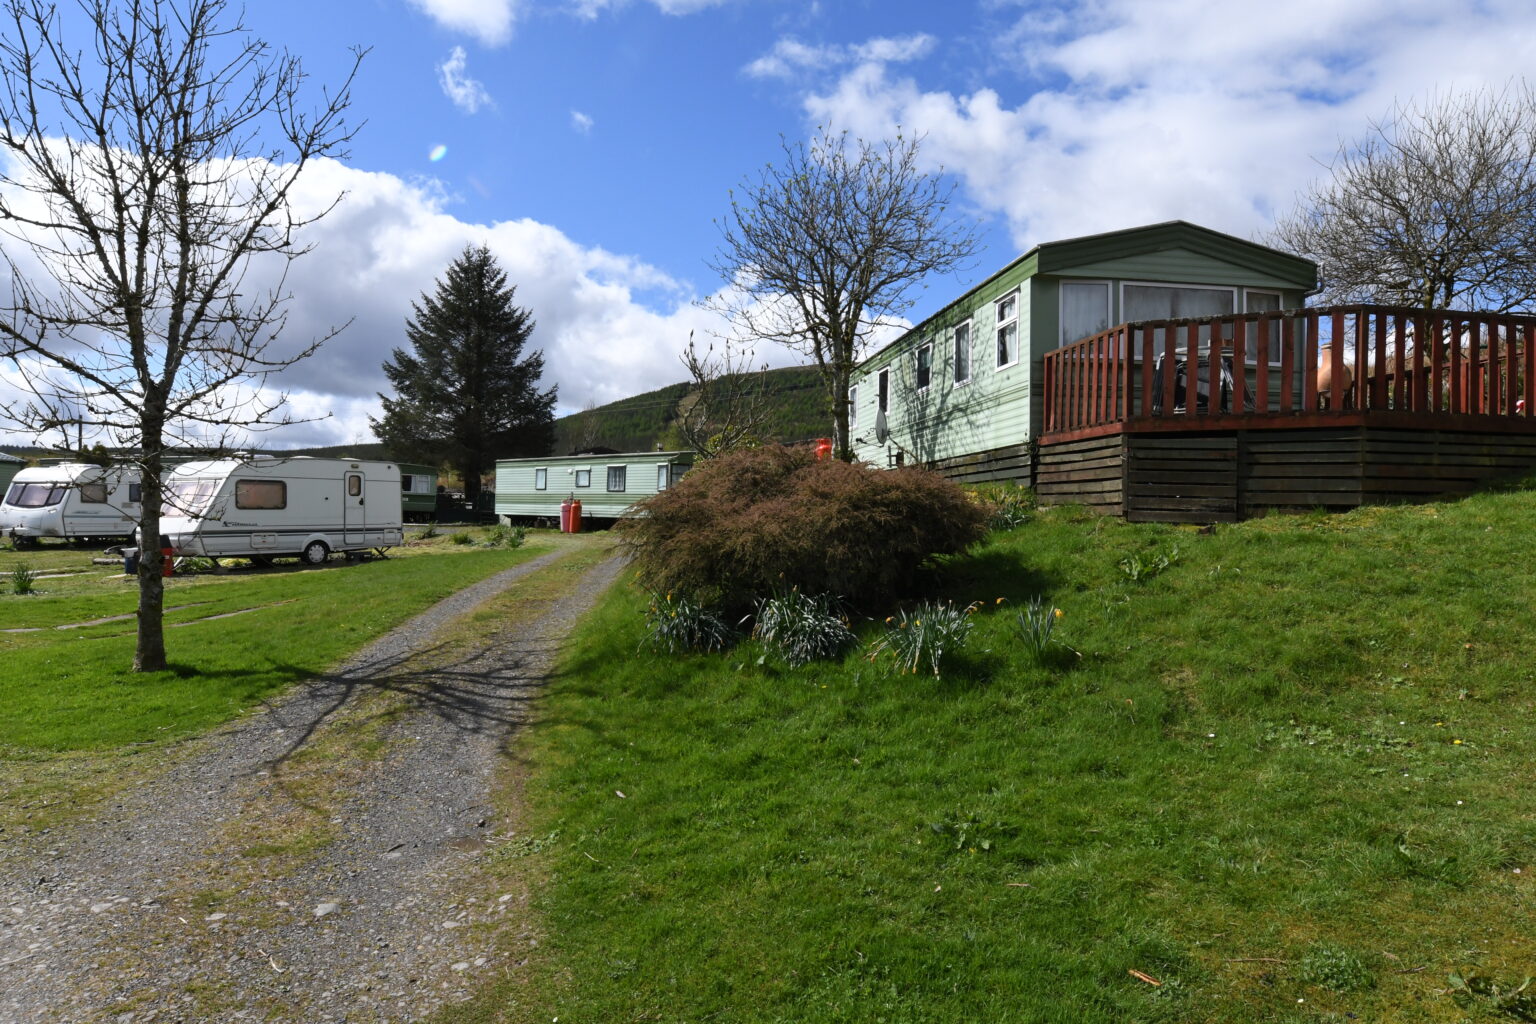 For Sale Angecroft Holiday Park Scottish Border’s in the Ettrick Valley